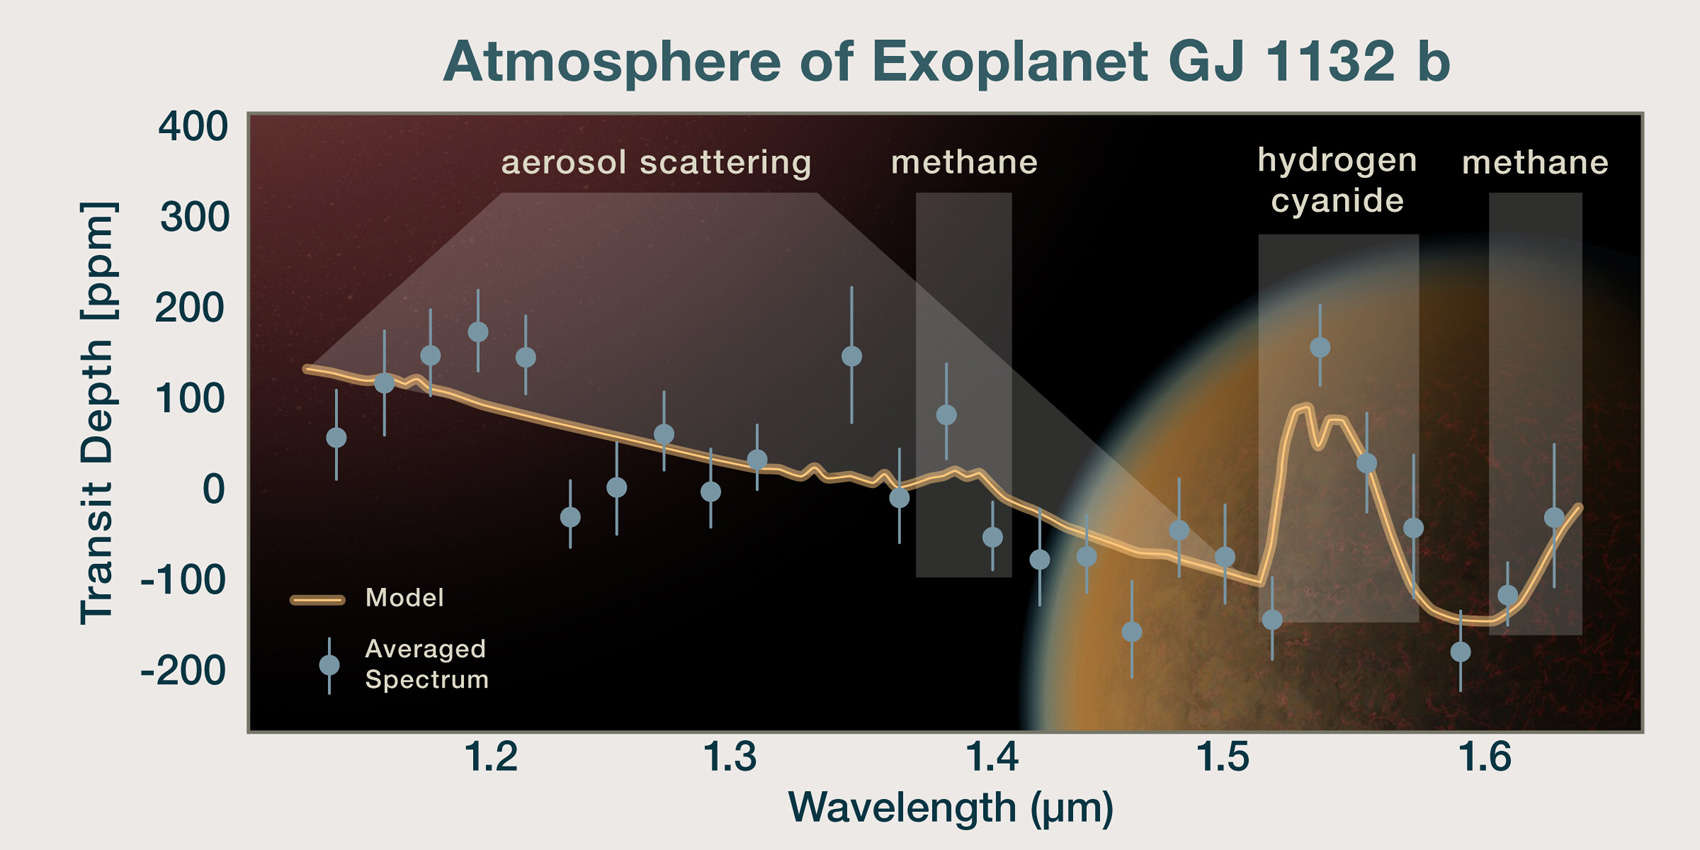 A schematic of the spectrum (blue dots = measured, orange line = model fit) found for the atmosphere of the planet GJ 1132b, showing the presence of aerosols, hydrogen cyanide, and methane. The wavelengths represent the color of light in the near infrared